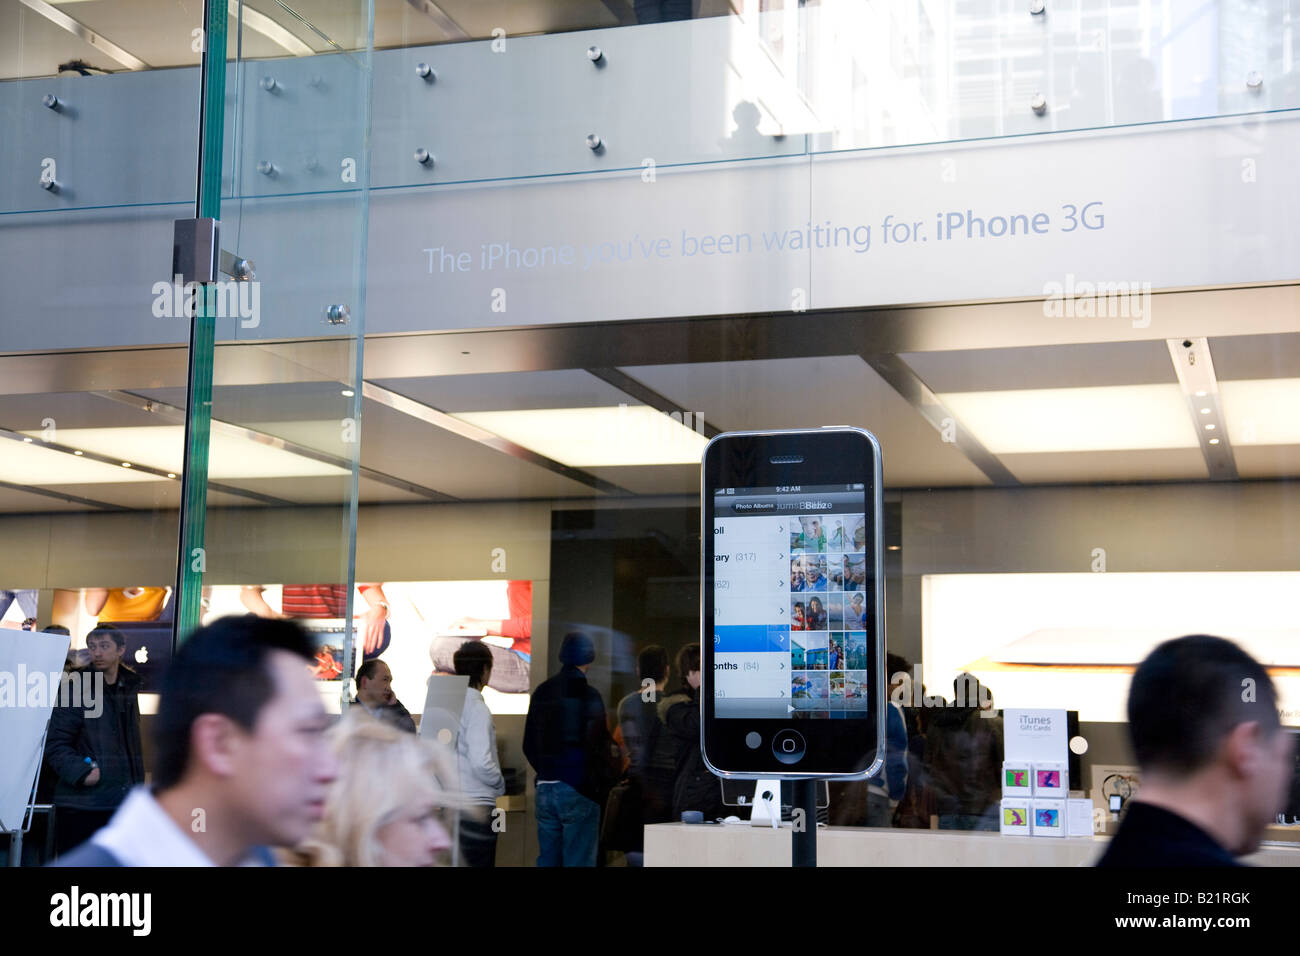 apple iphone 3G in the window of Sydney's apple store on its first day of sale in australia,11th july 2008 Stock Photo